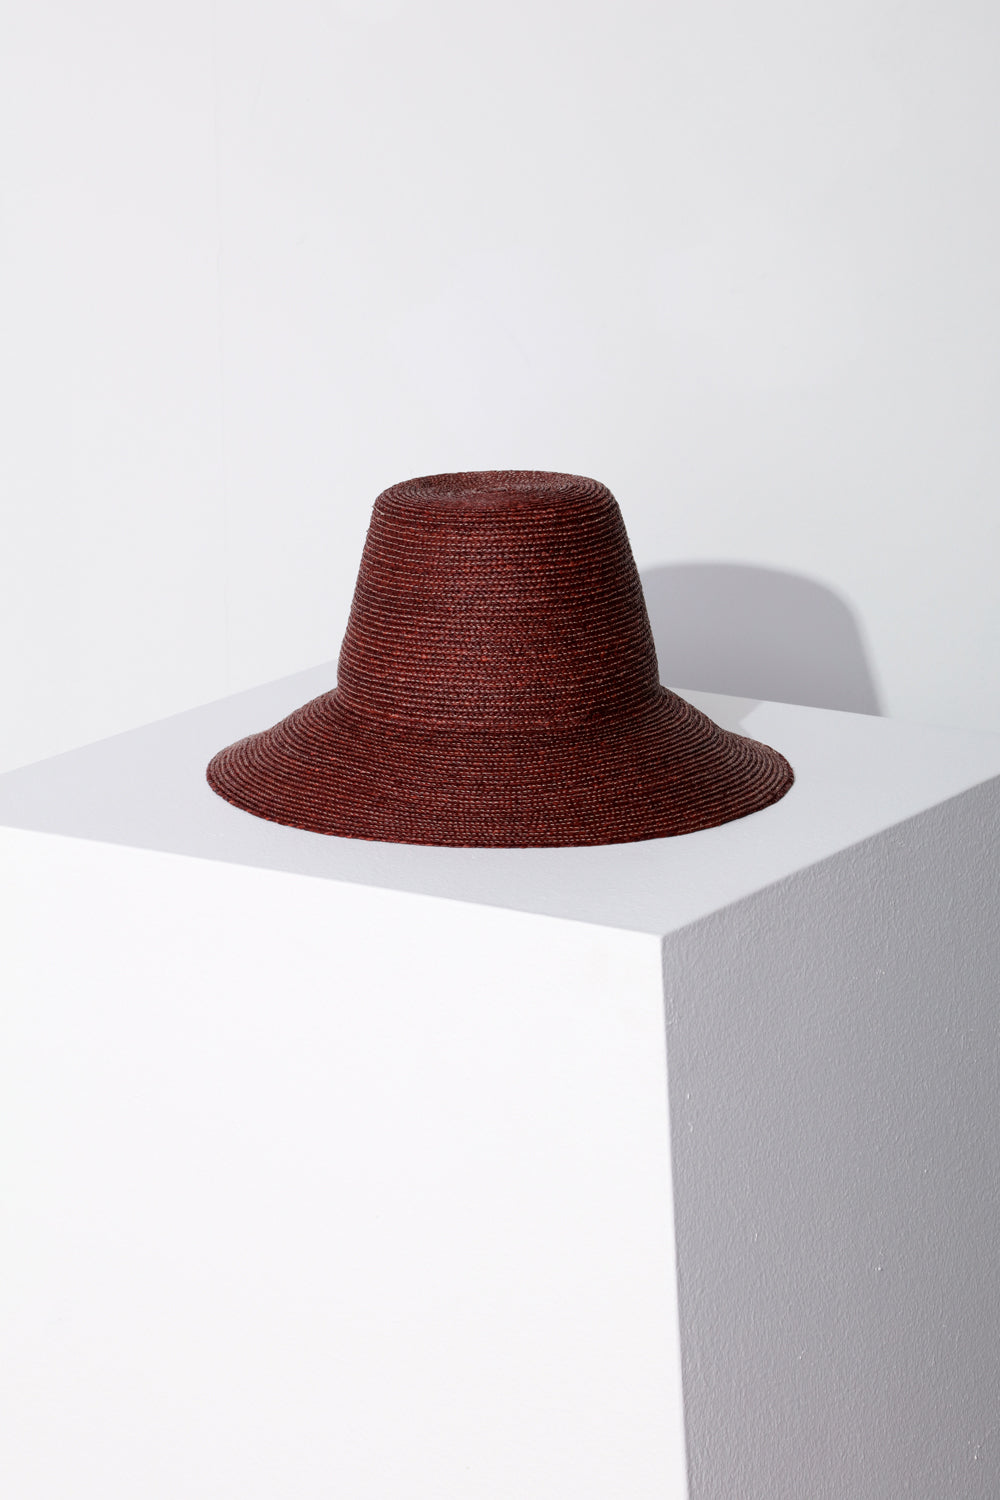 JANESSA LEONÉ Wes Hat in Chocolate